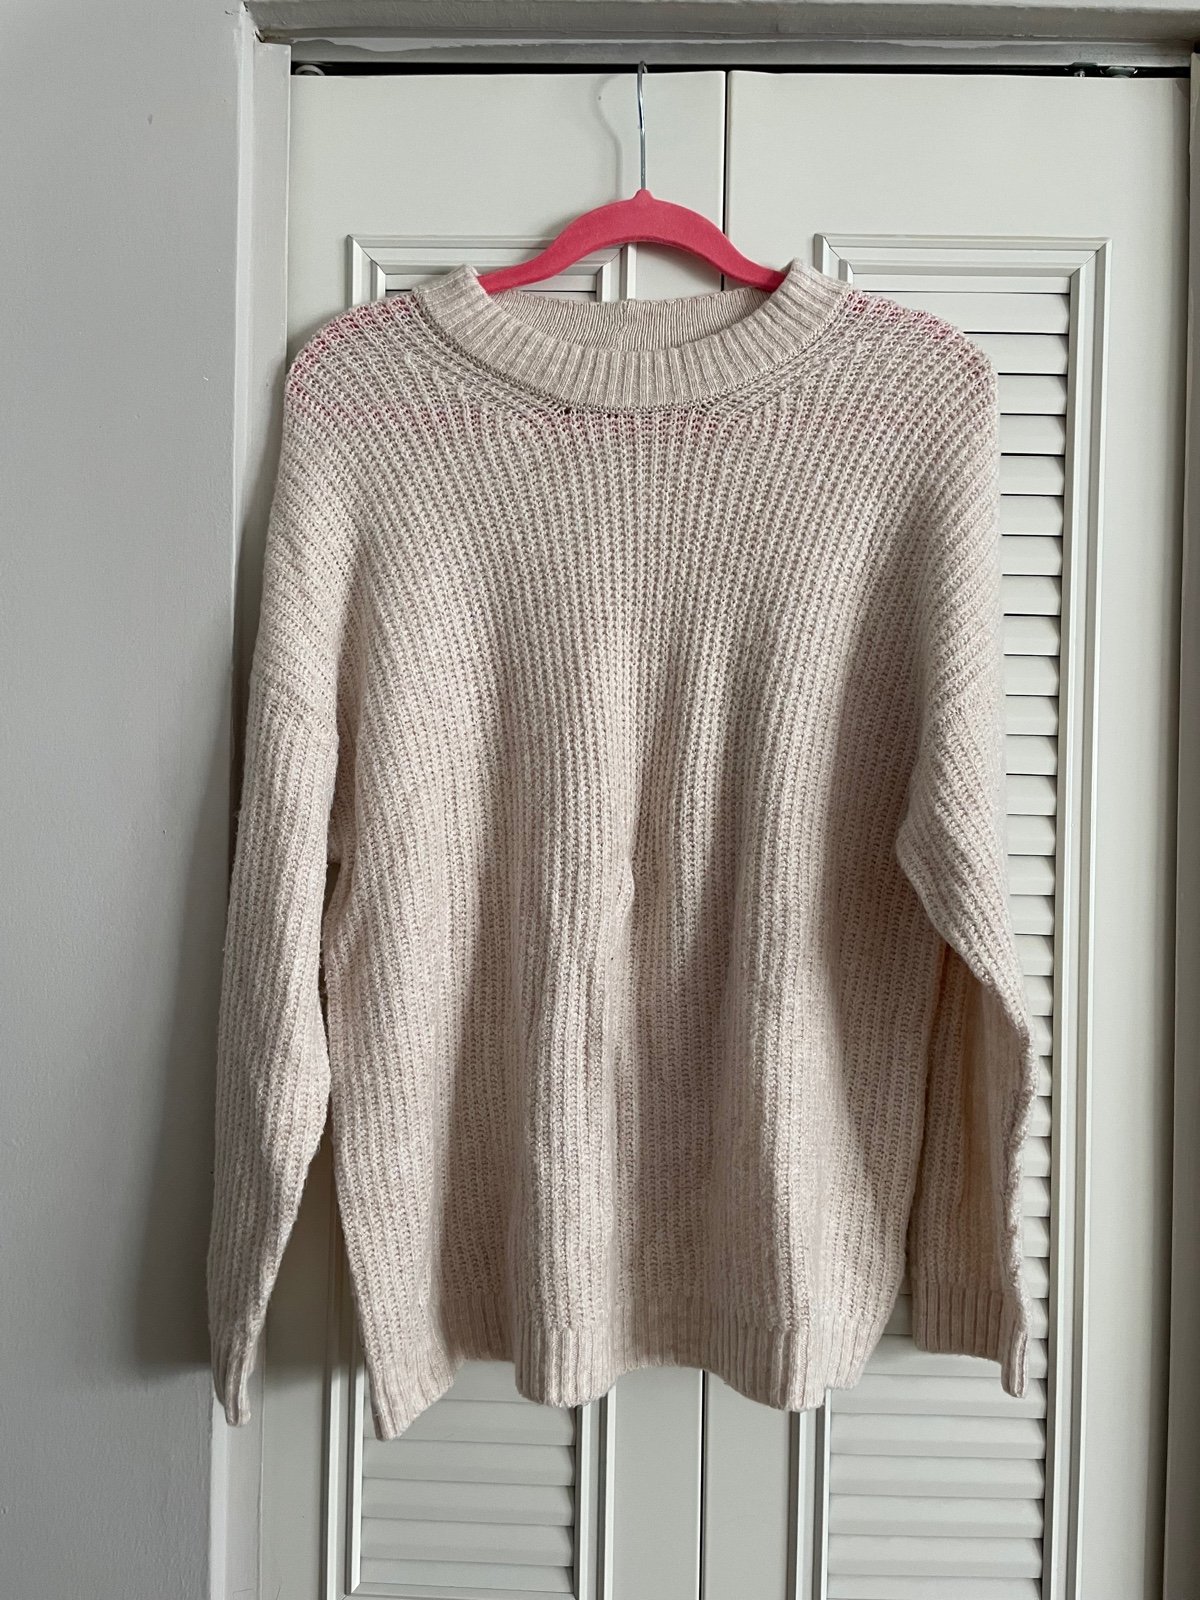 Wholesale price American Eagle Sweater N8gdYc30K outlet